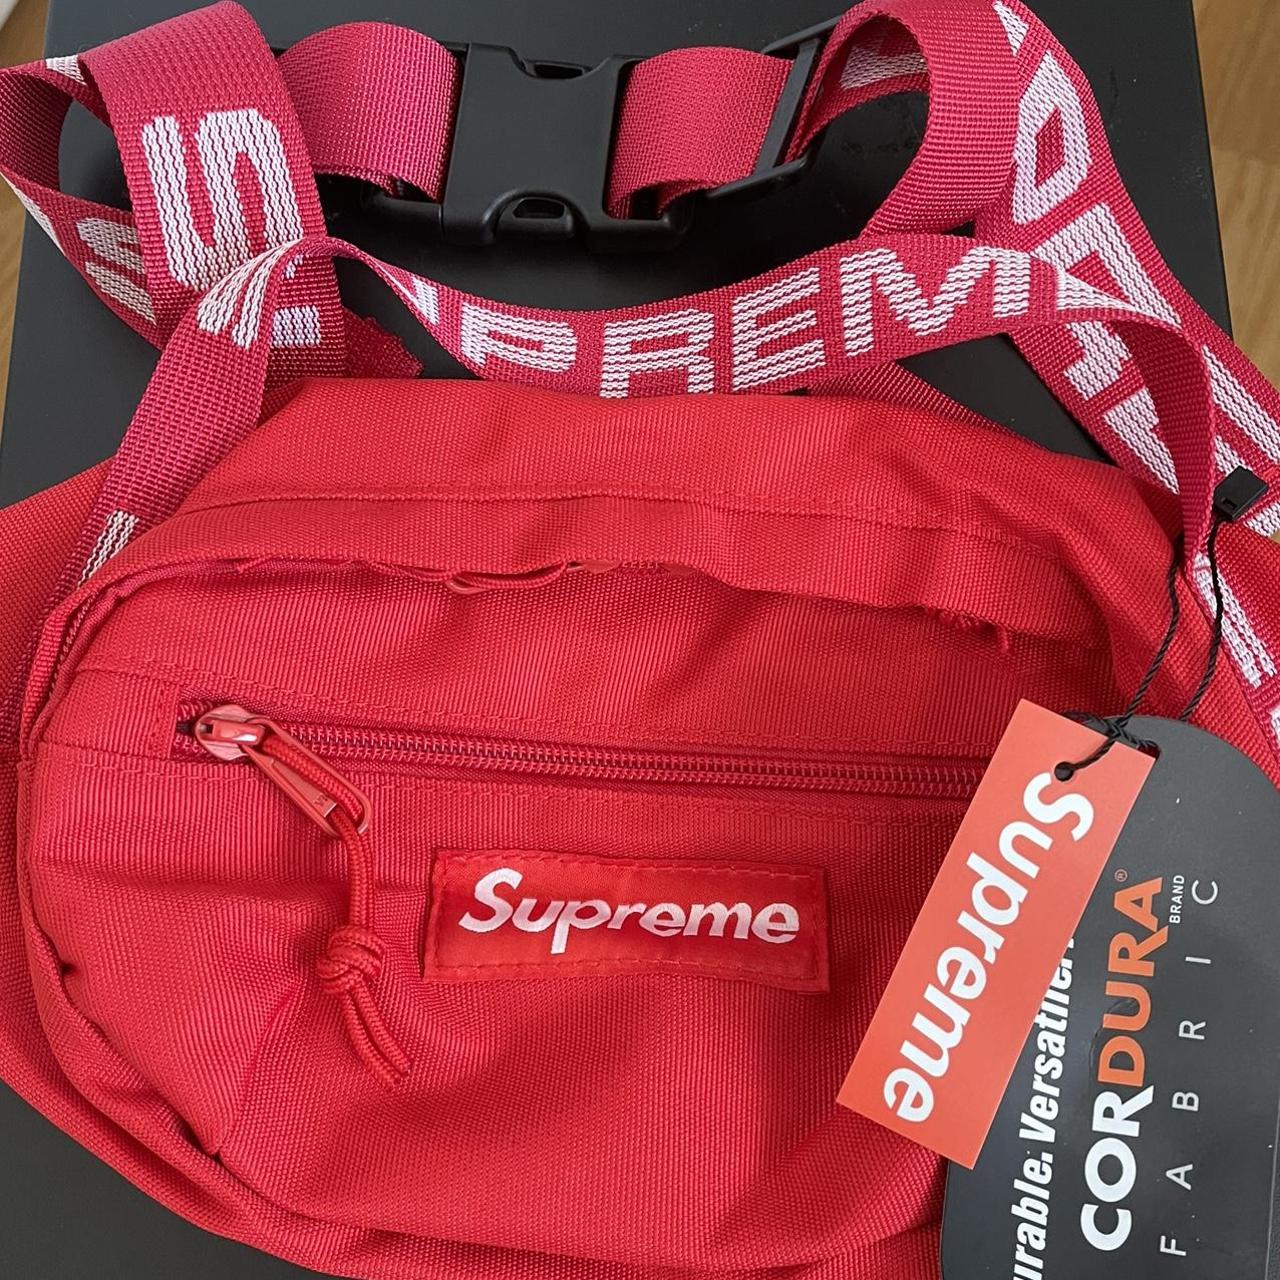 Hi I’m selling supreme bag new with tag thank you